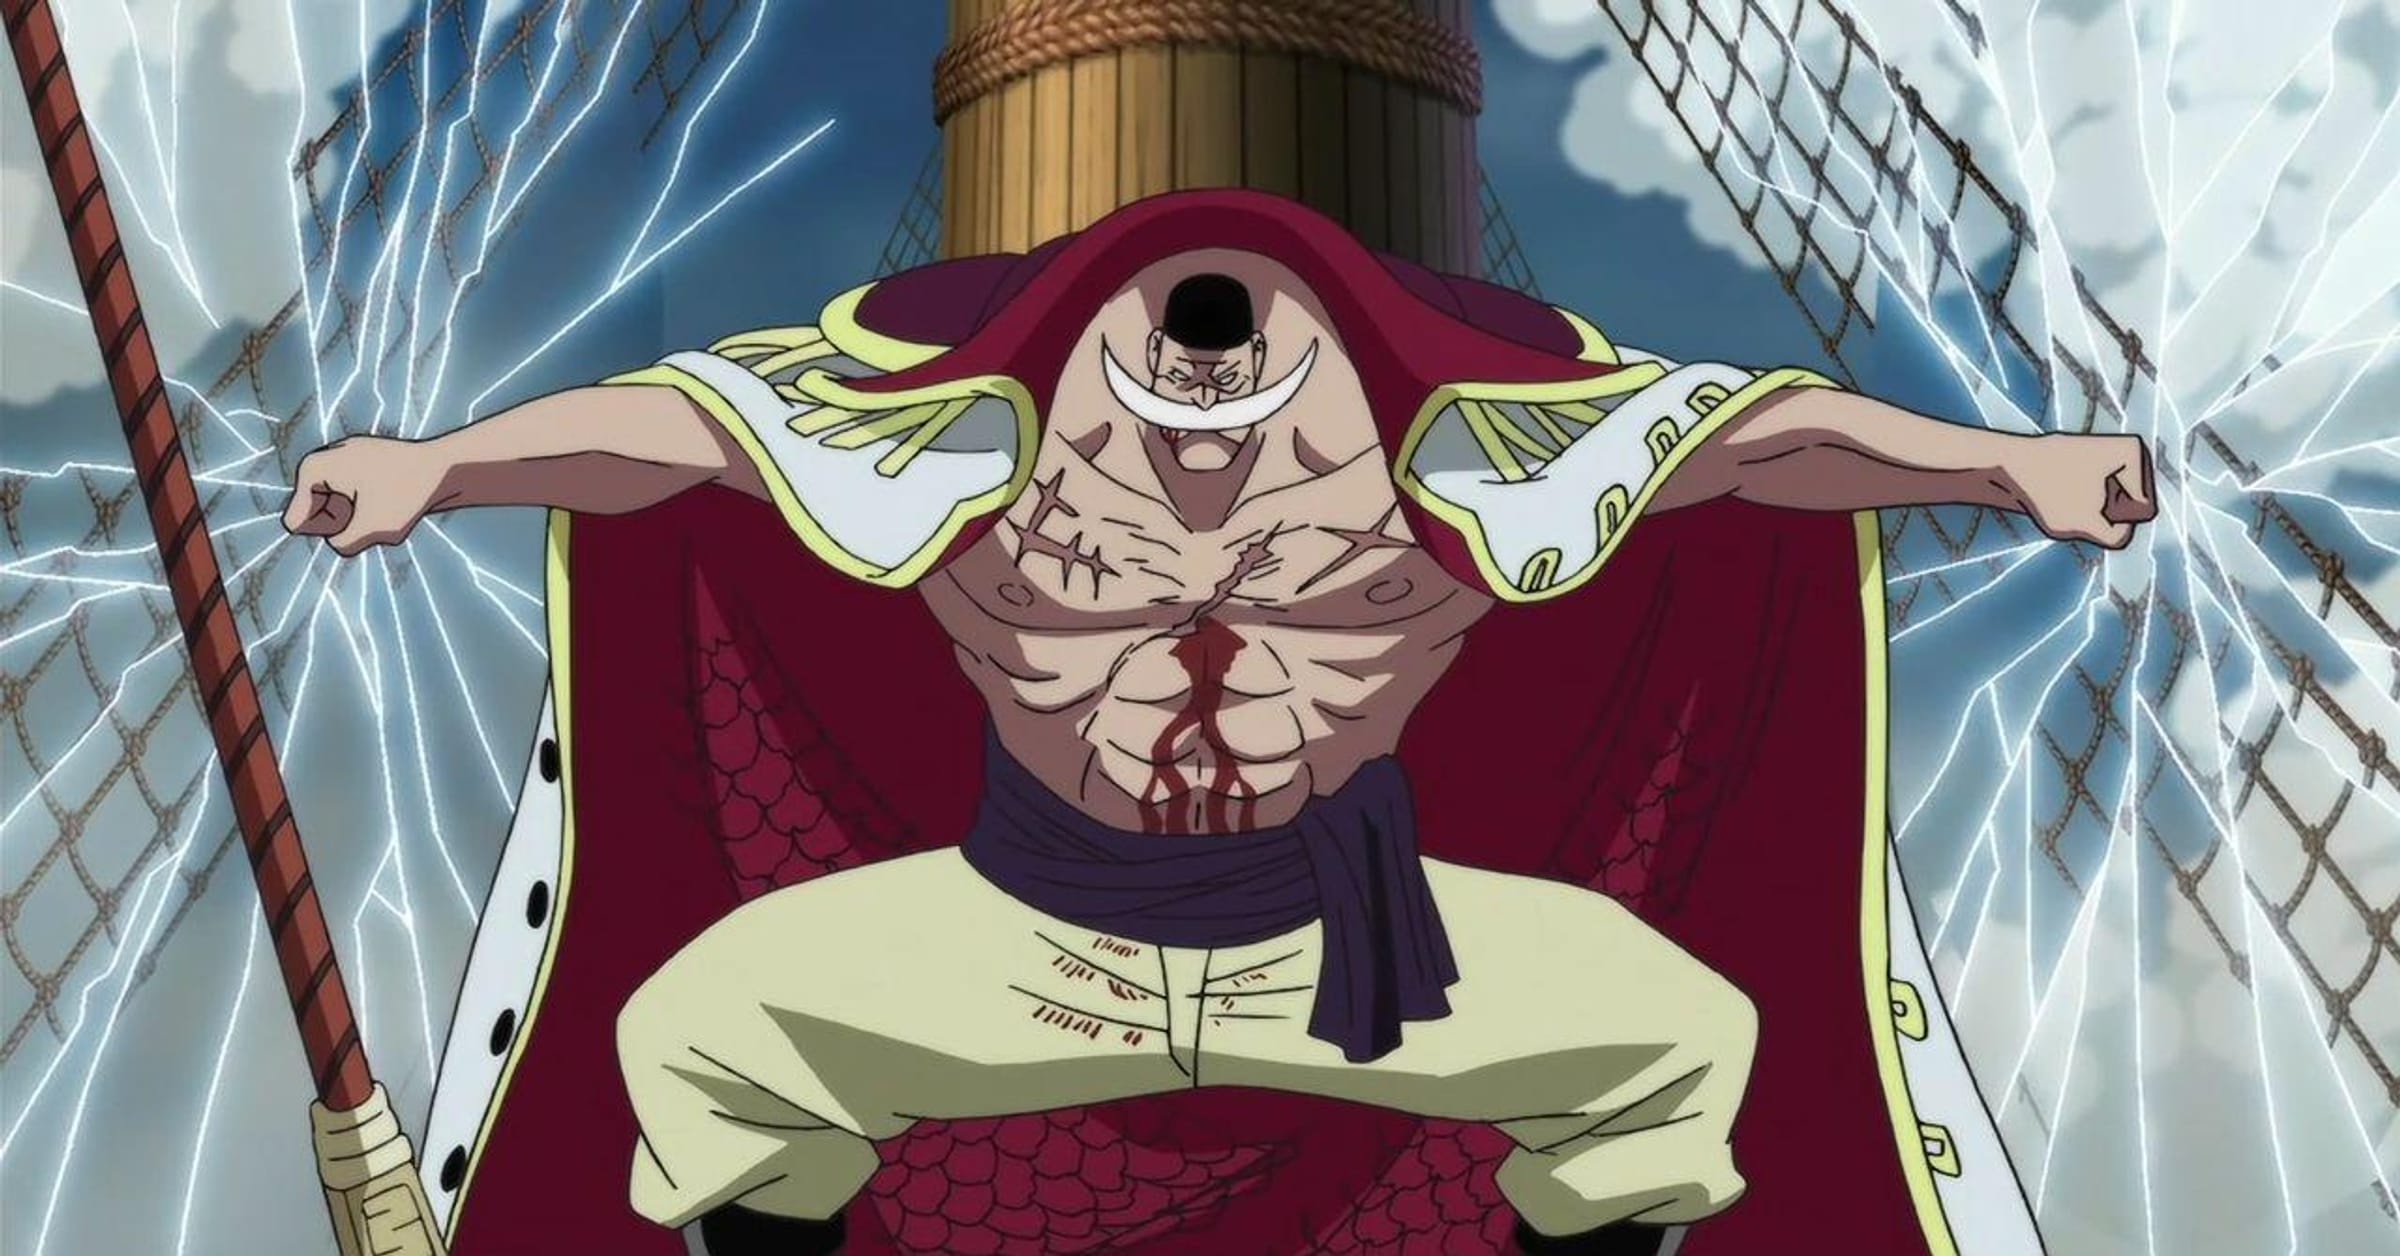 The 13 Strongest Logia Users In One Piece, Ranked